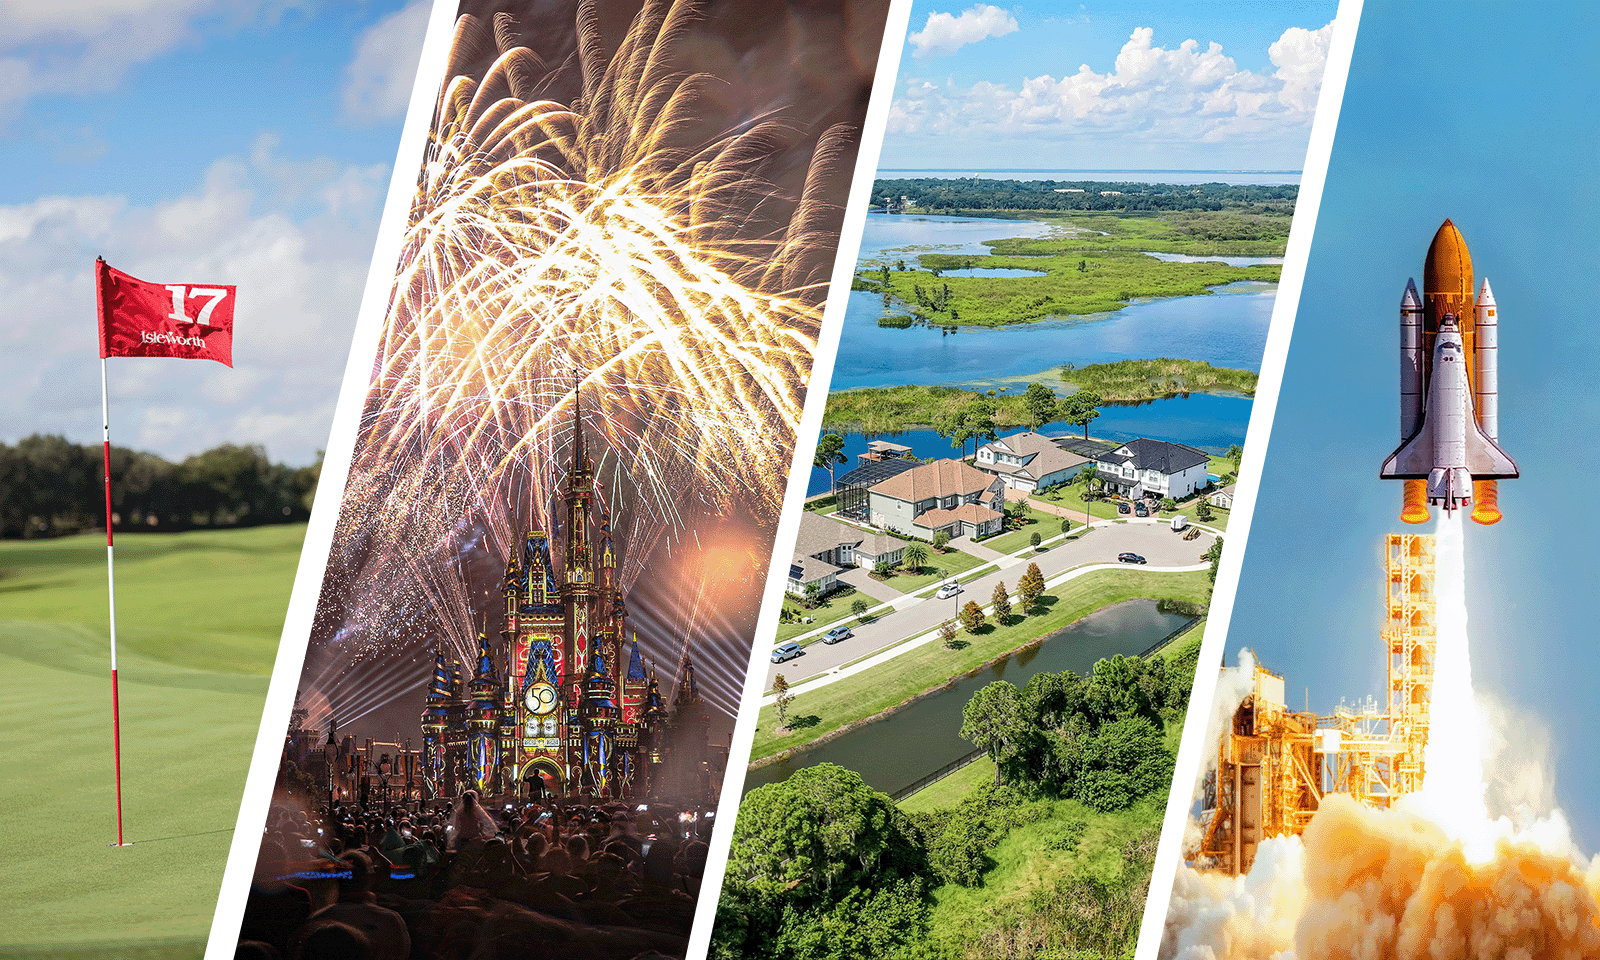 four images with golf, fireworks, lakes, and rocket launch